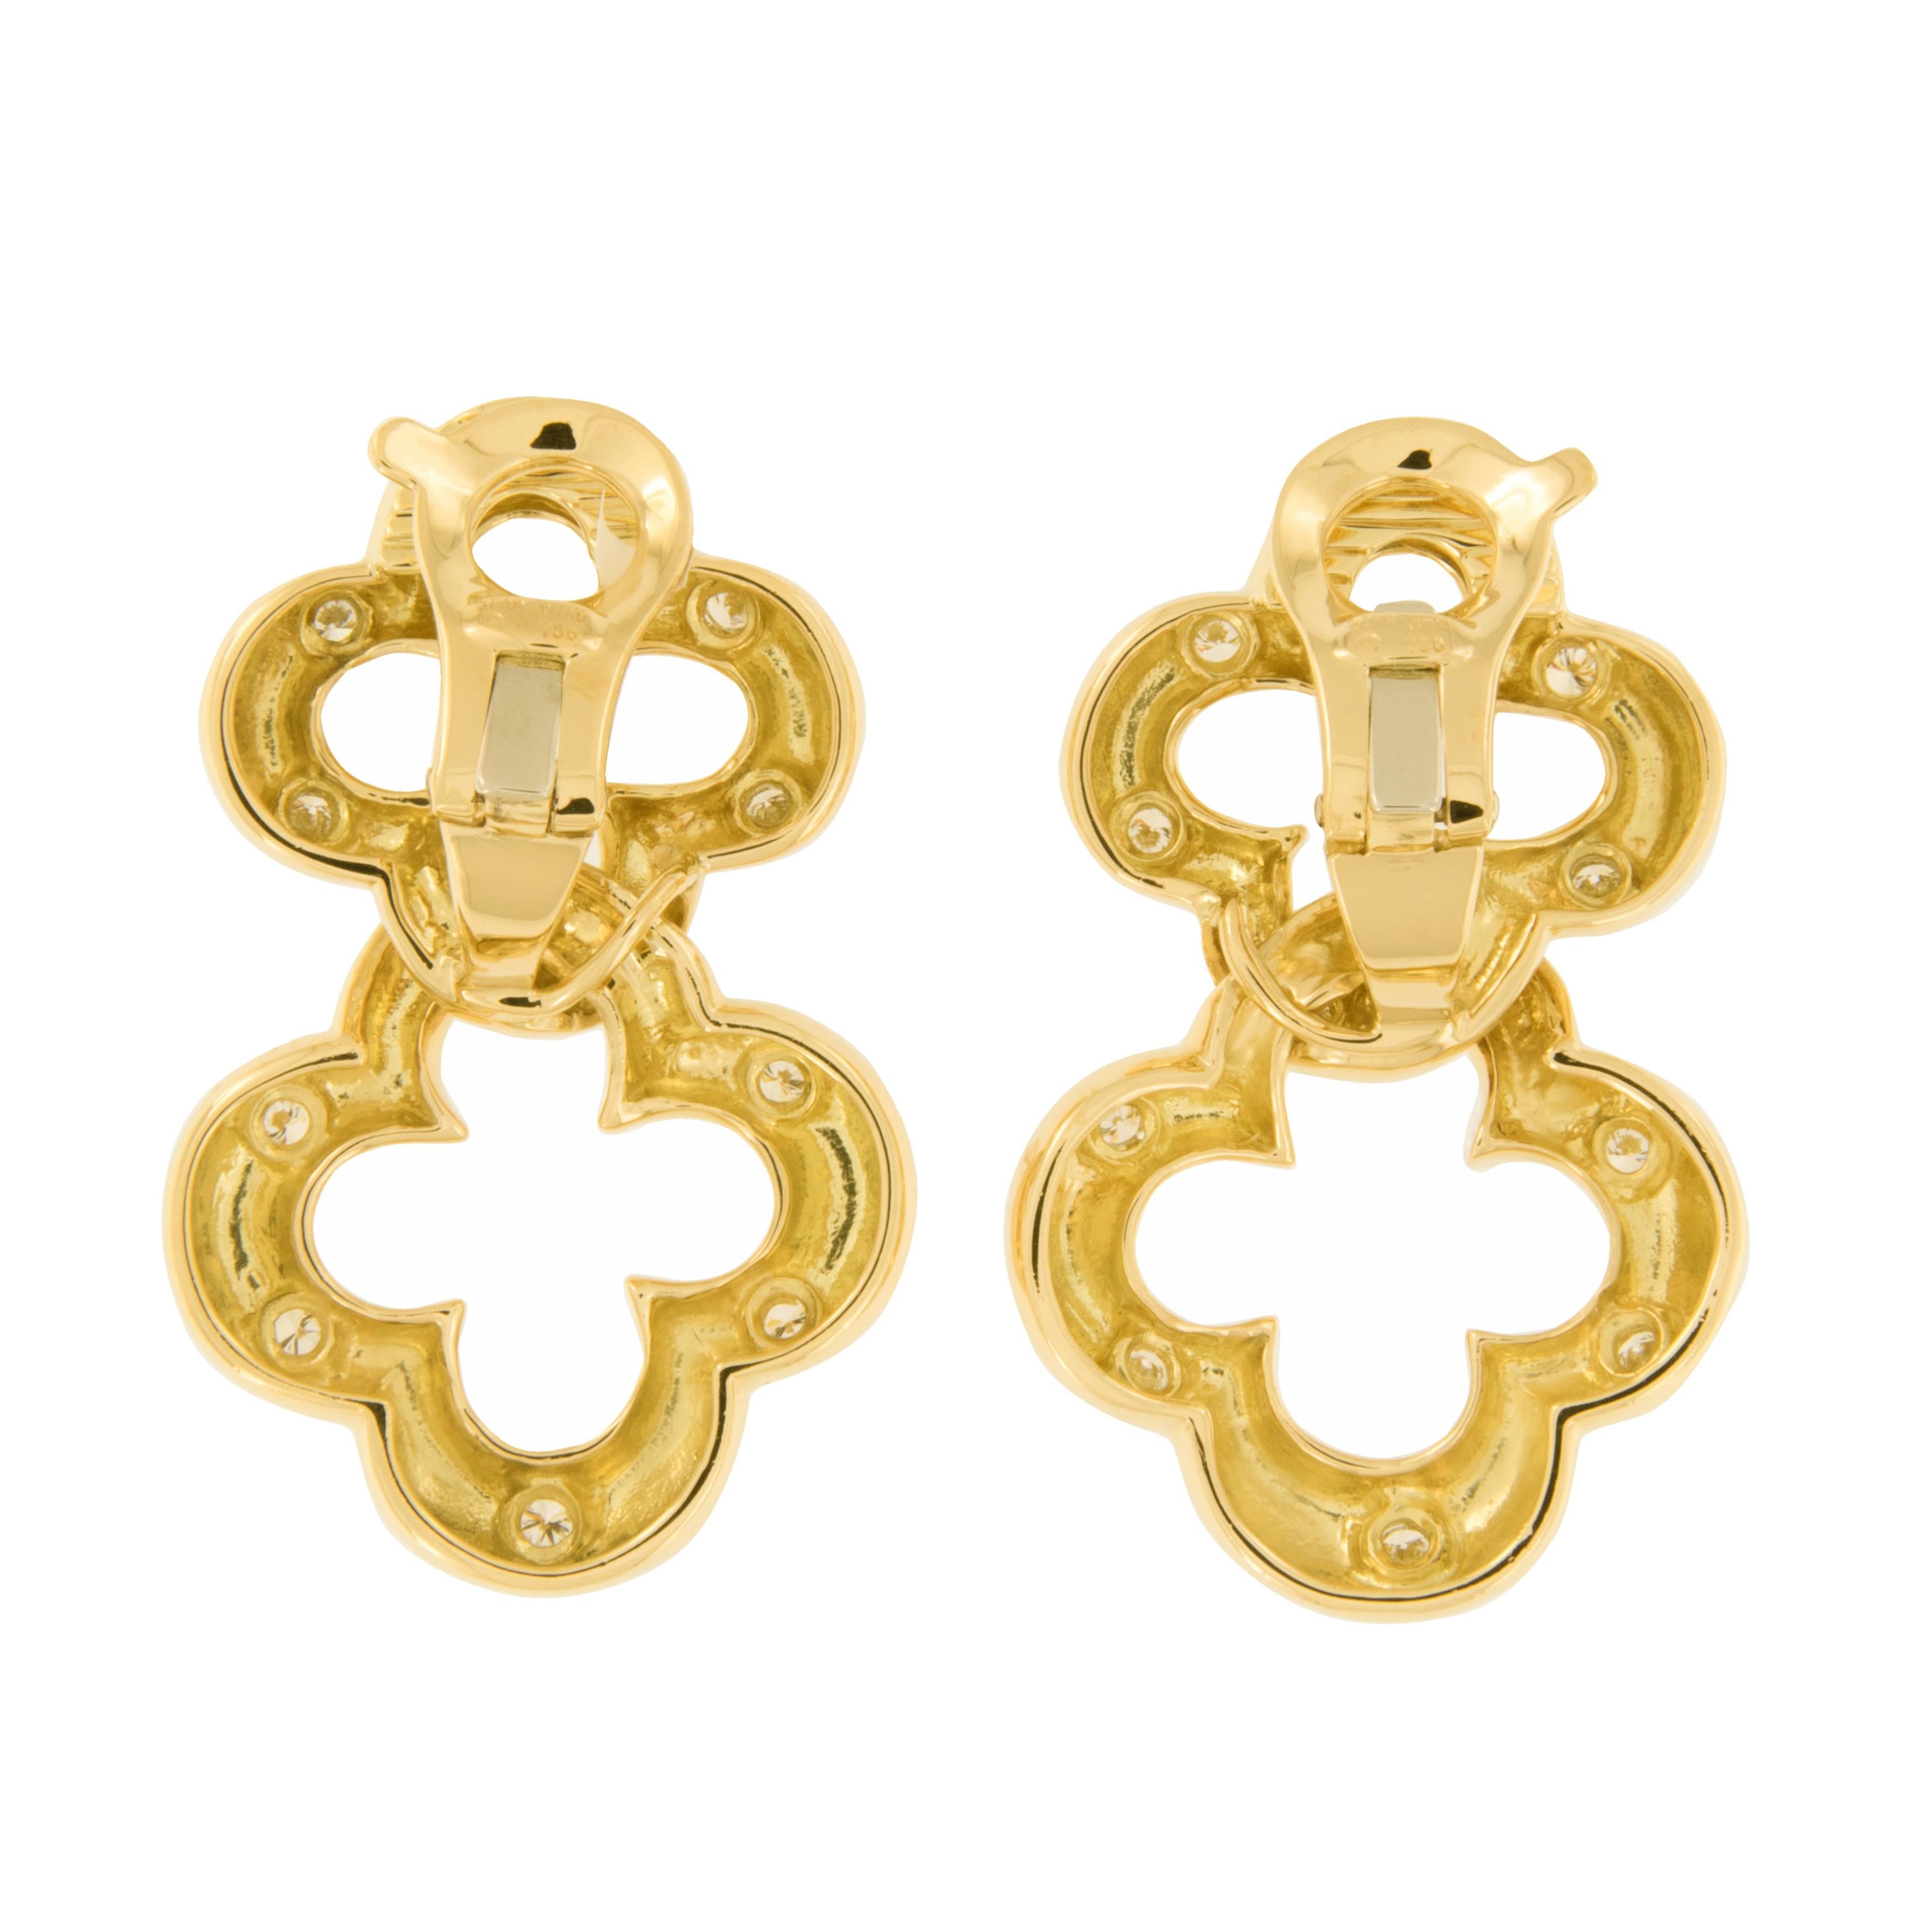 18k yellow gold and diamond Double Clover drop earrings made by Jean Vitau. These exceptionally executed clip-on style earrings are beautifully accented with 0.80 cttw of F-G VS diamonds. Hand made in New York, USA

This piece is copyrighted and